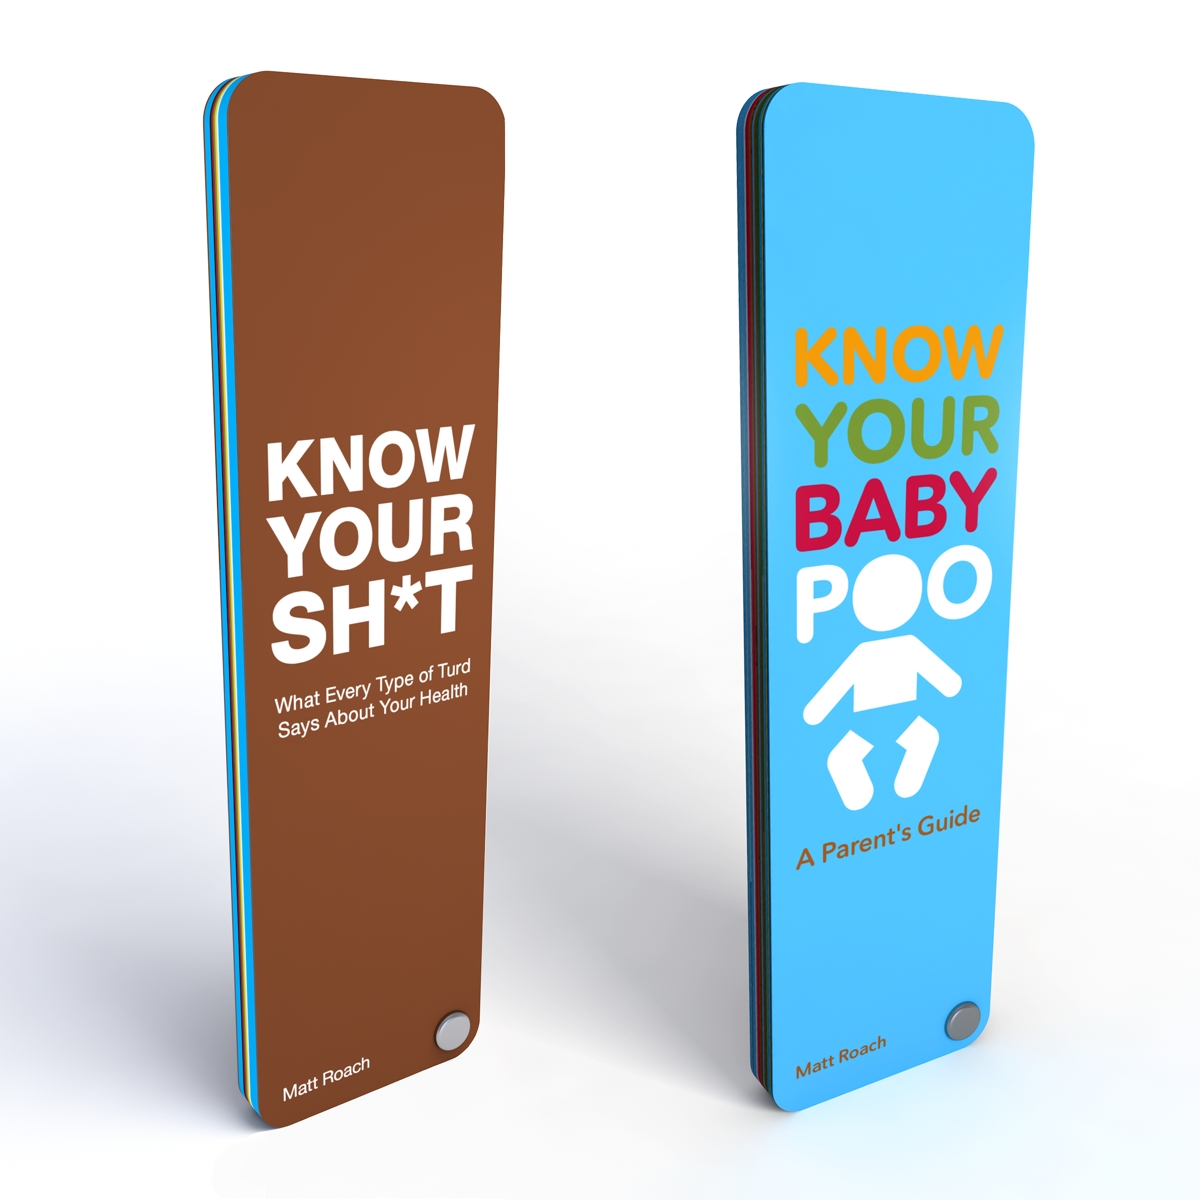 The pair of Know Your Sh*t swatch books